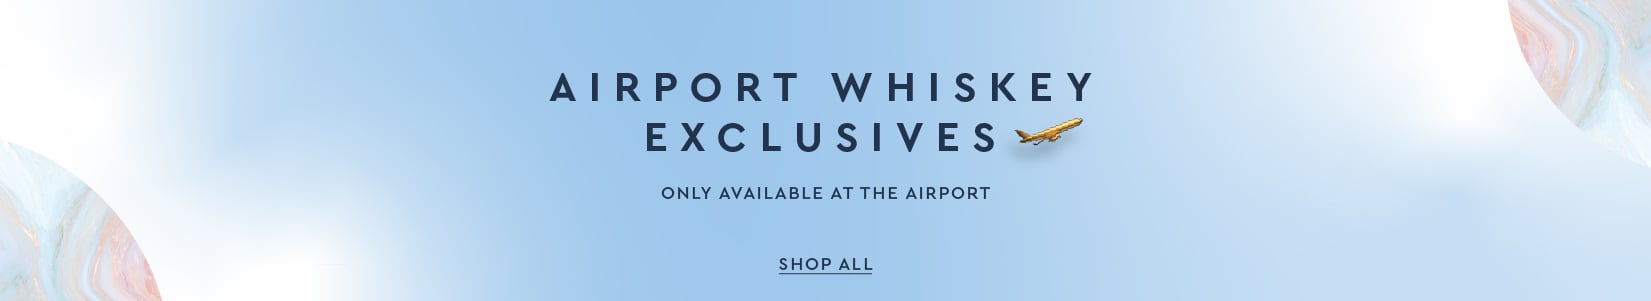 Duty Free exclusive